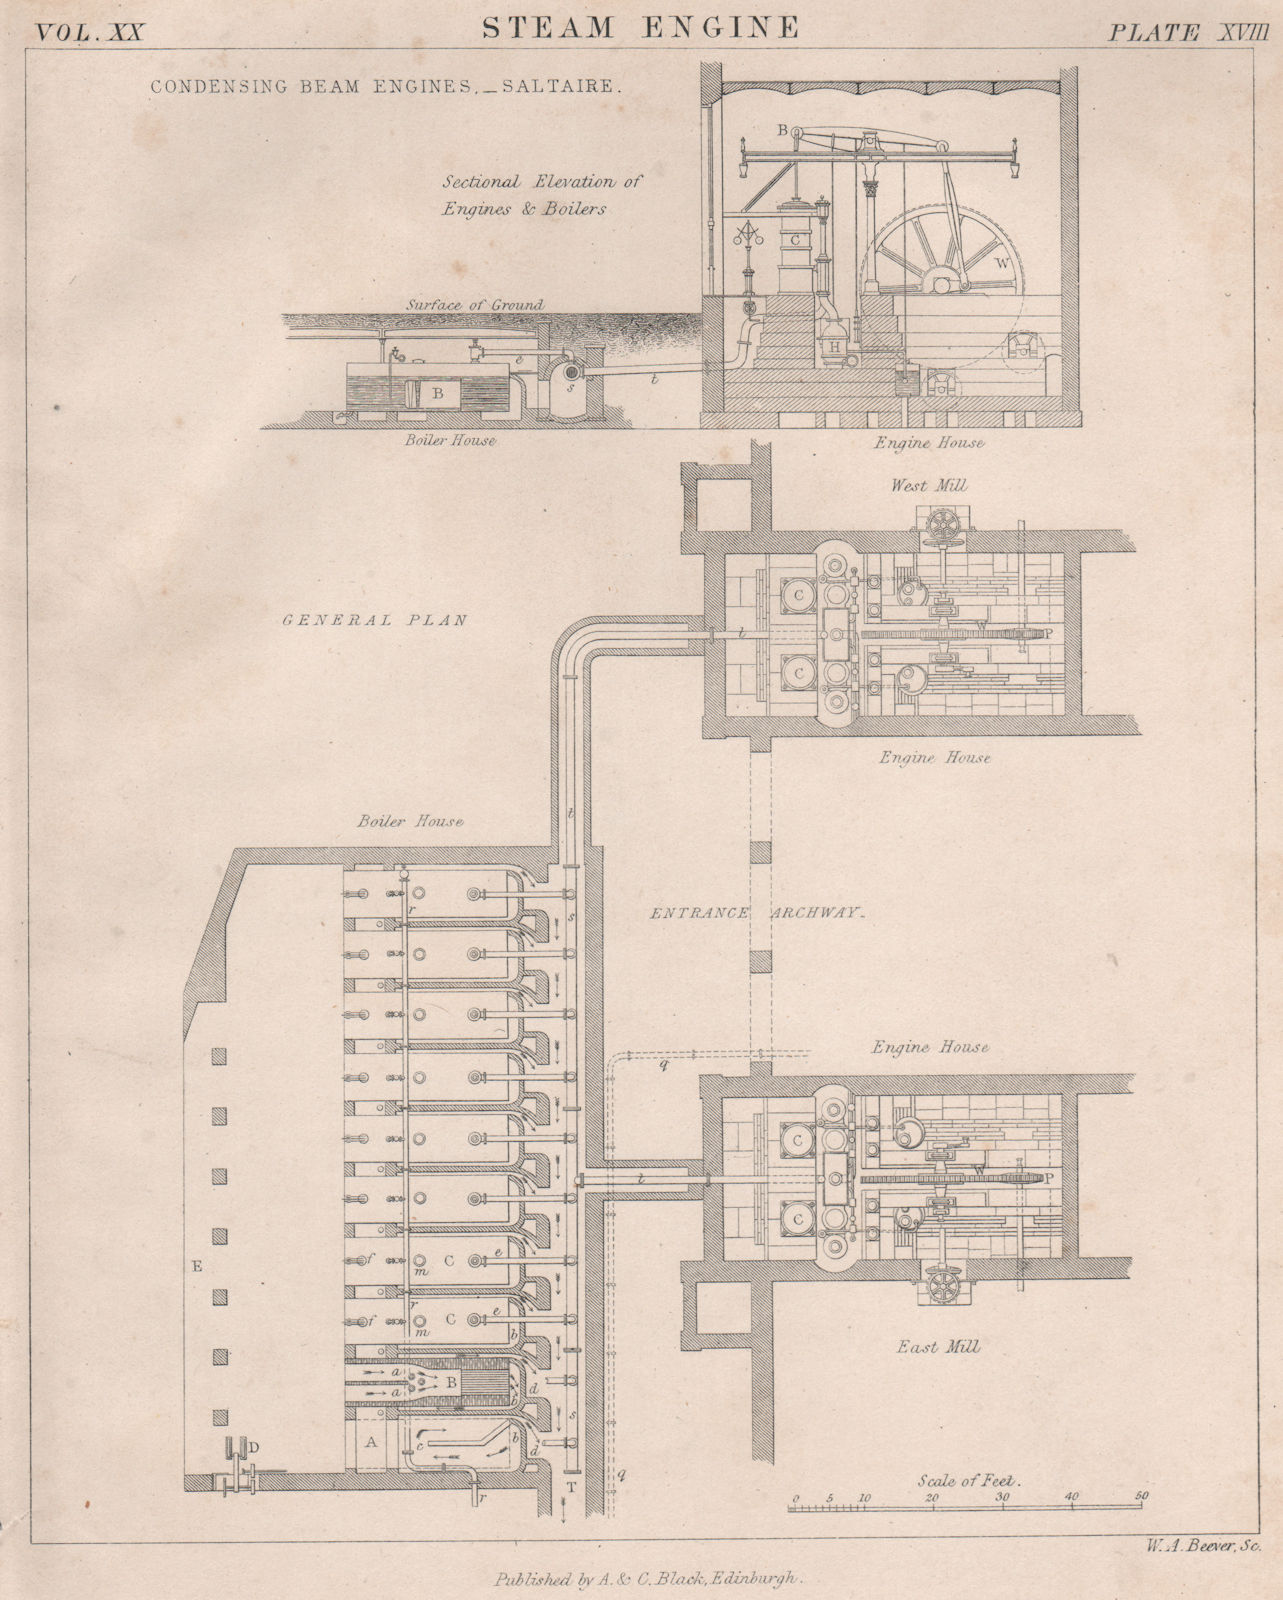 VICTORIAN ENGINEERING DRAWING. Condensing Beam Steam Engines. Saltaire 1860